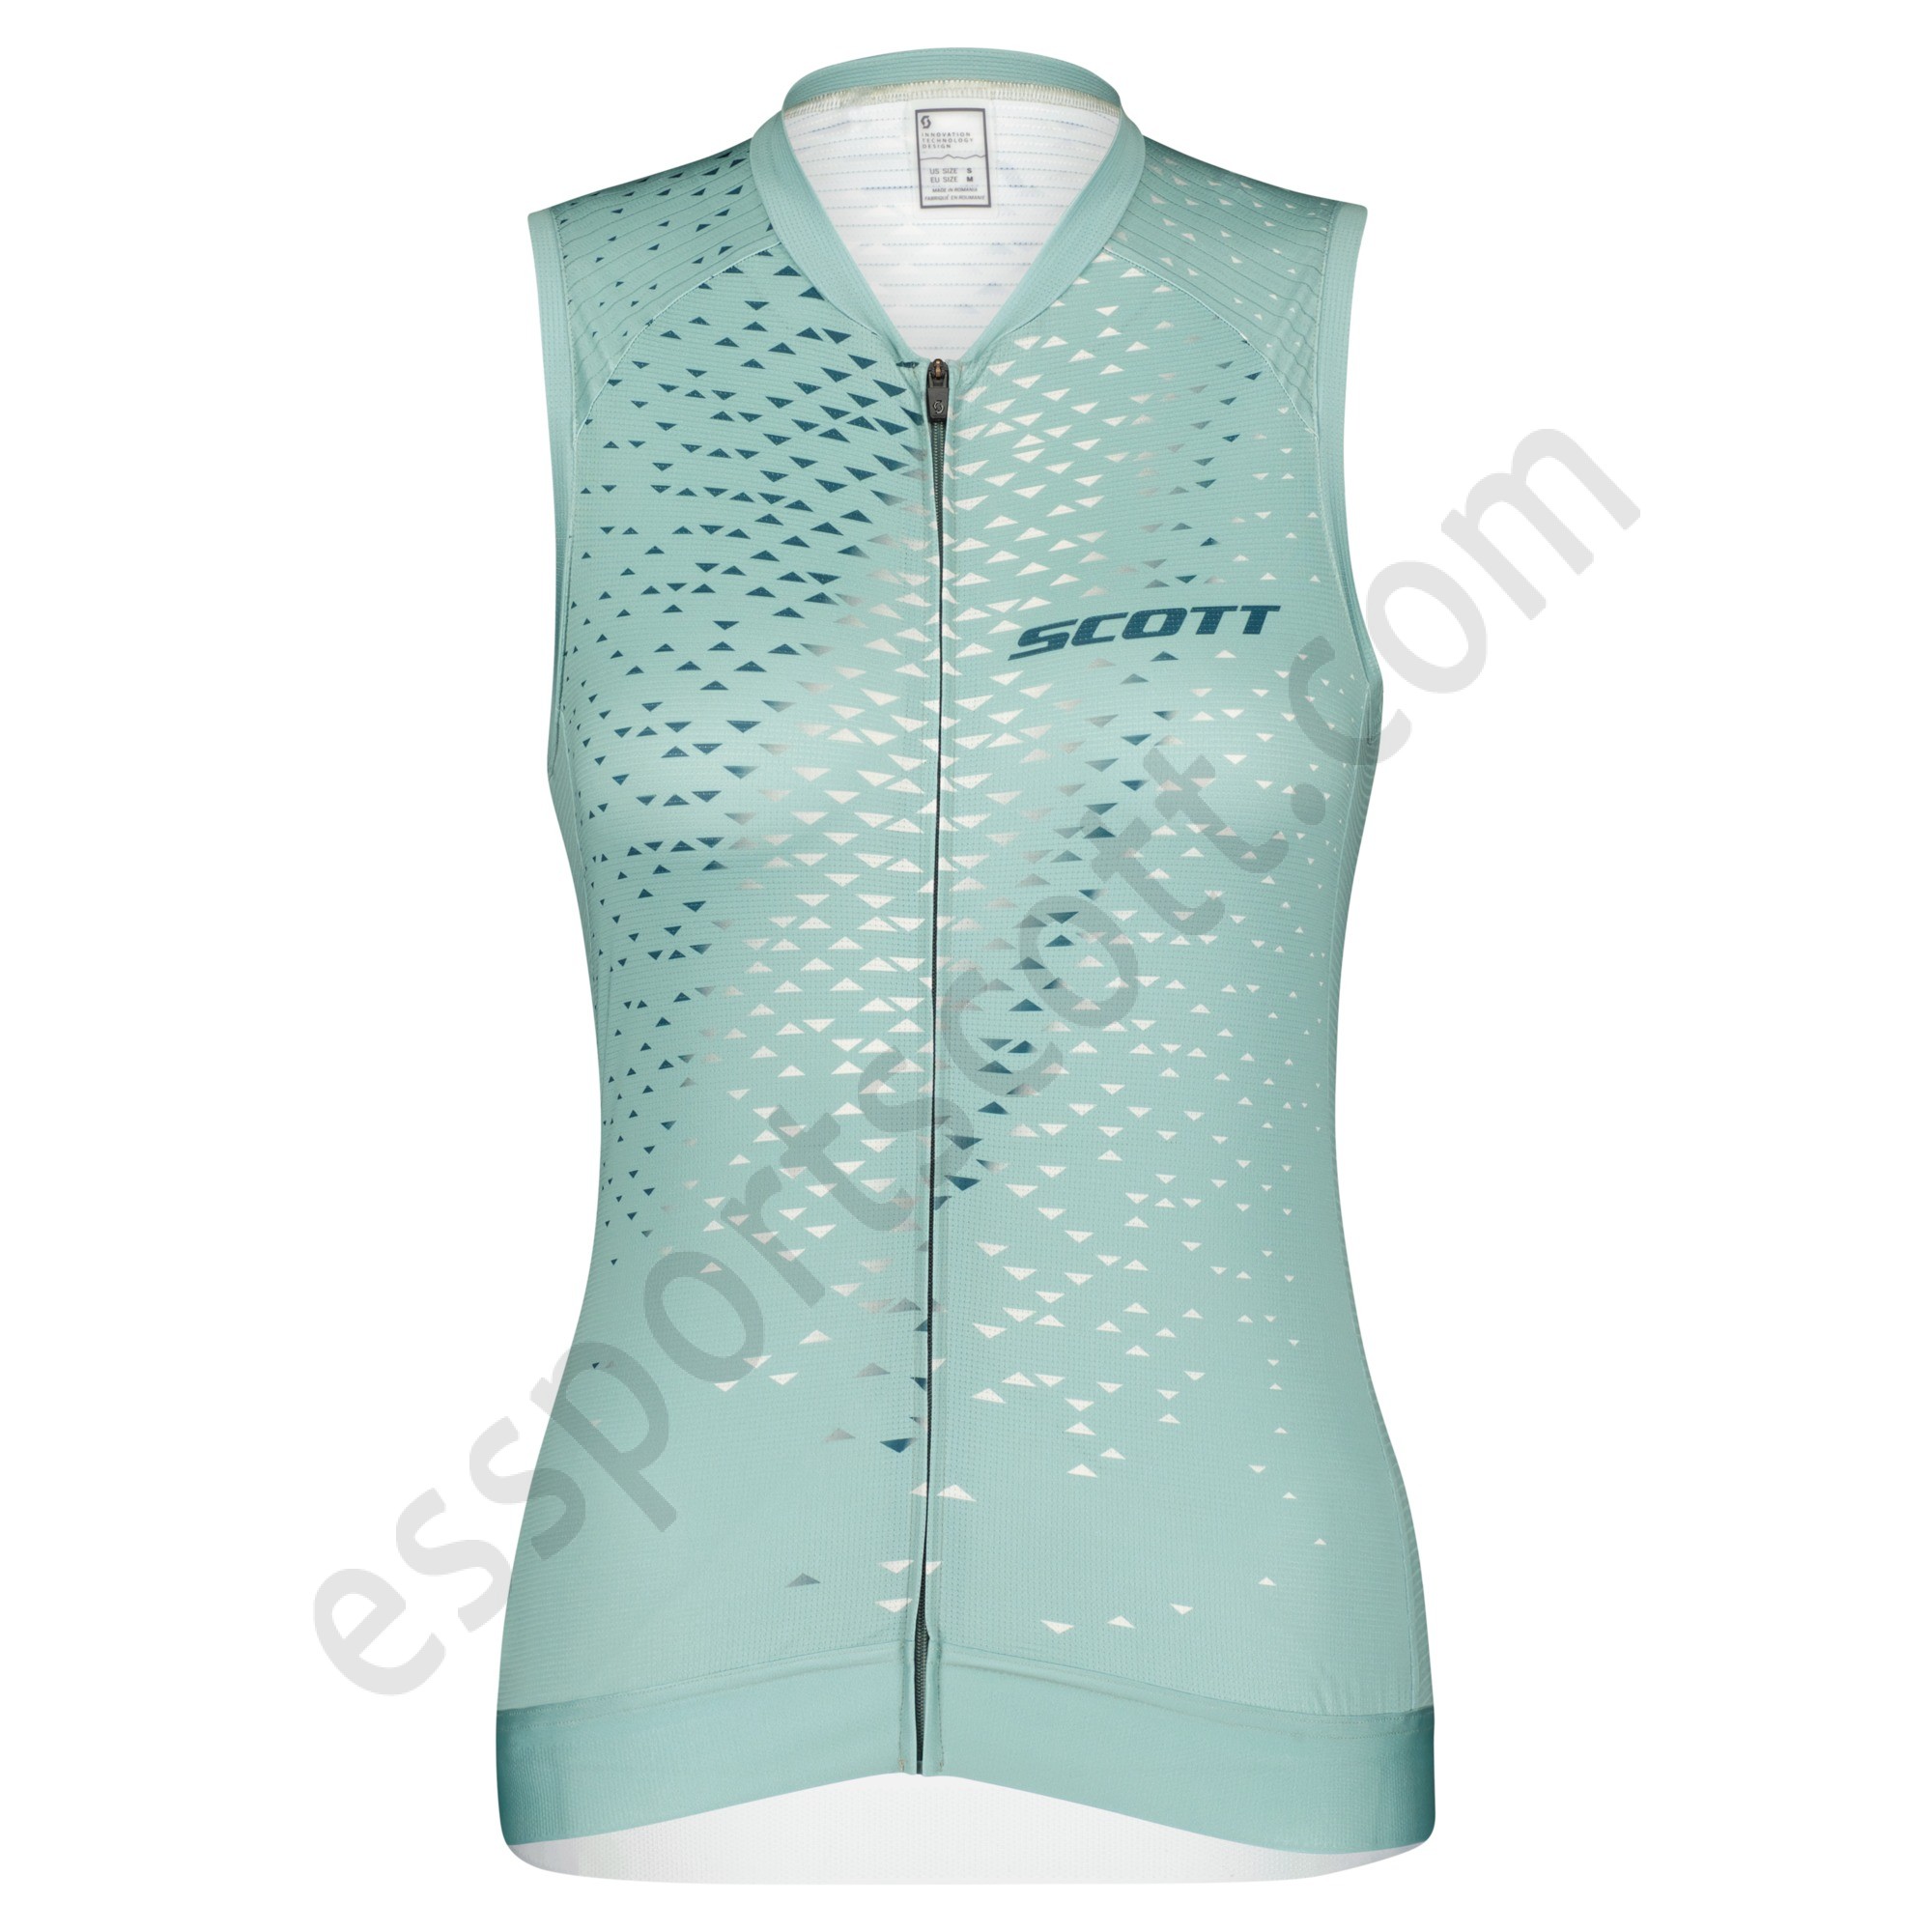 Scott Descuento ◇ Maillot sin mangas para mujer RC Pro - Scott Descuento ◇ Maillot sin mangas para mujer RC Pro